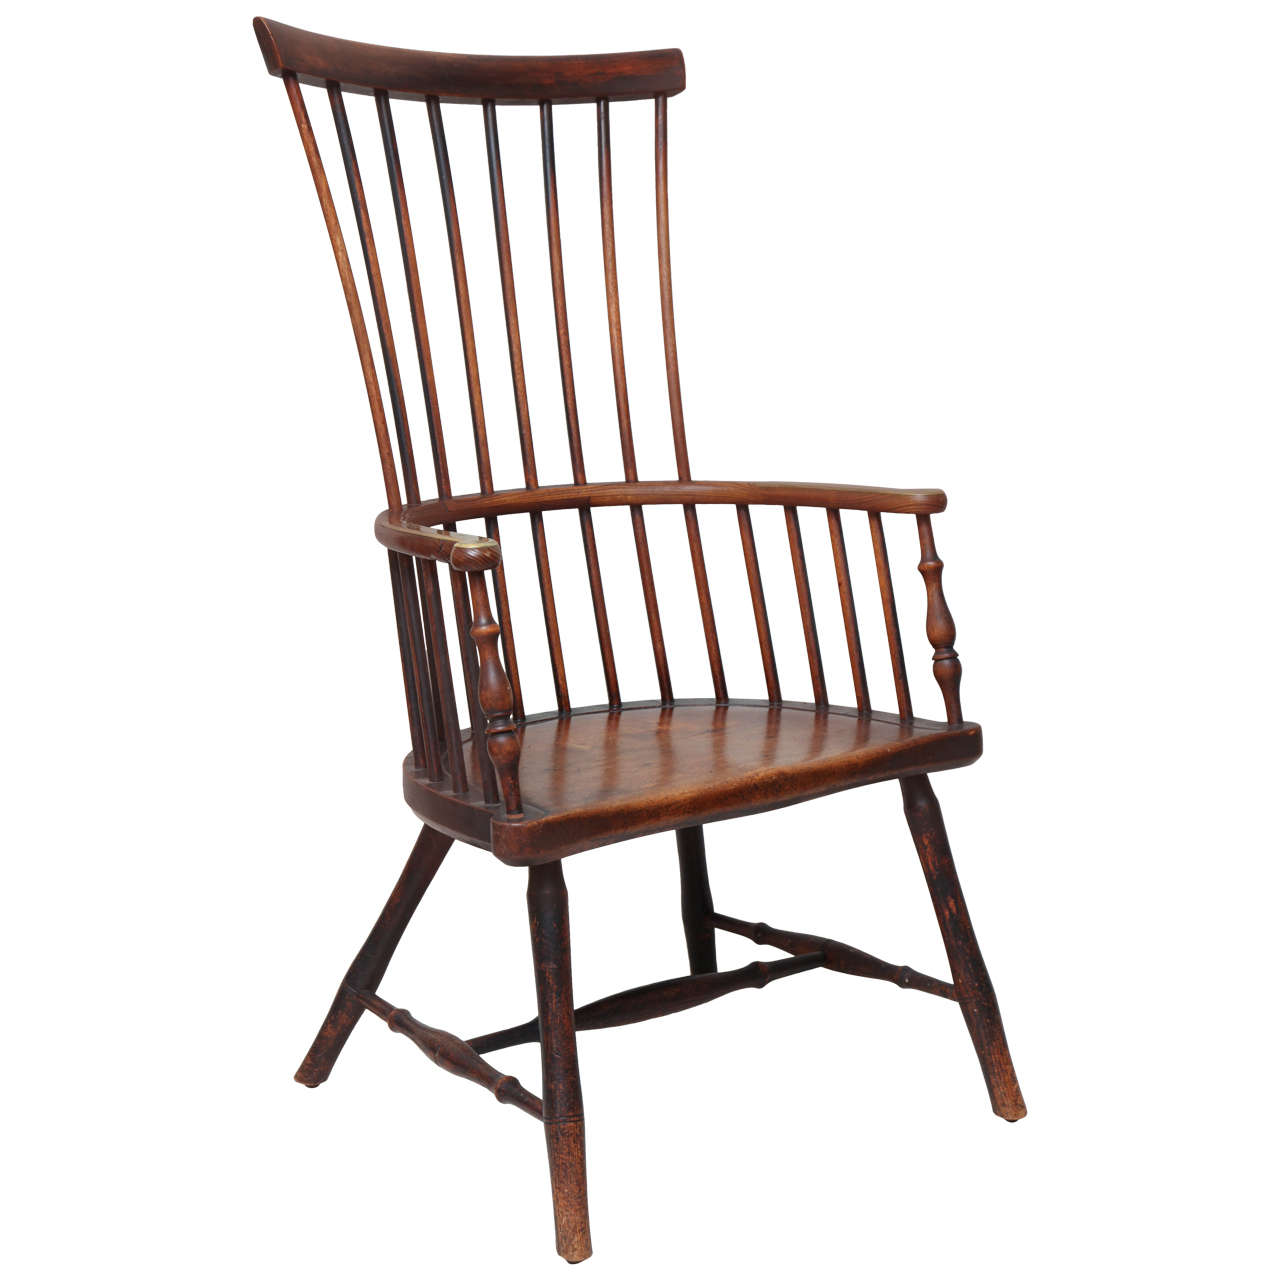 Early 19th Century Scottish Comb Back Windsor Armchair